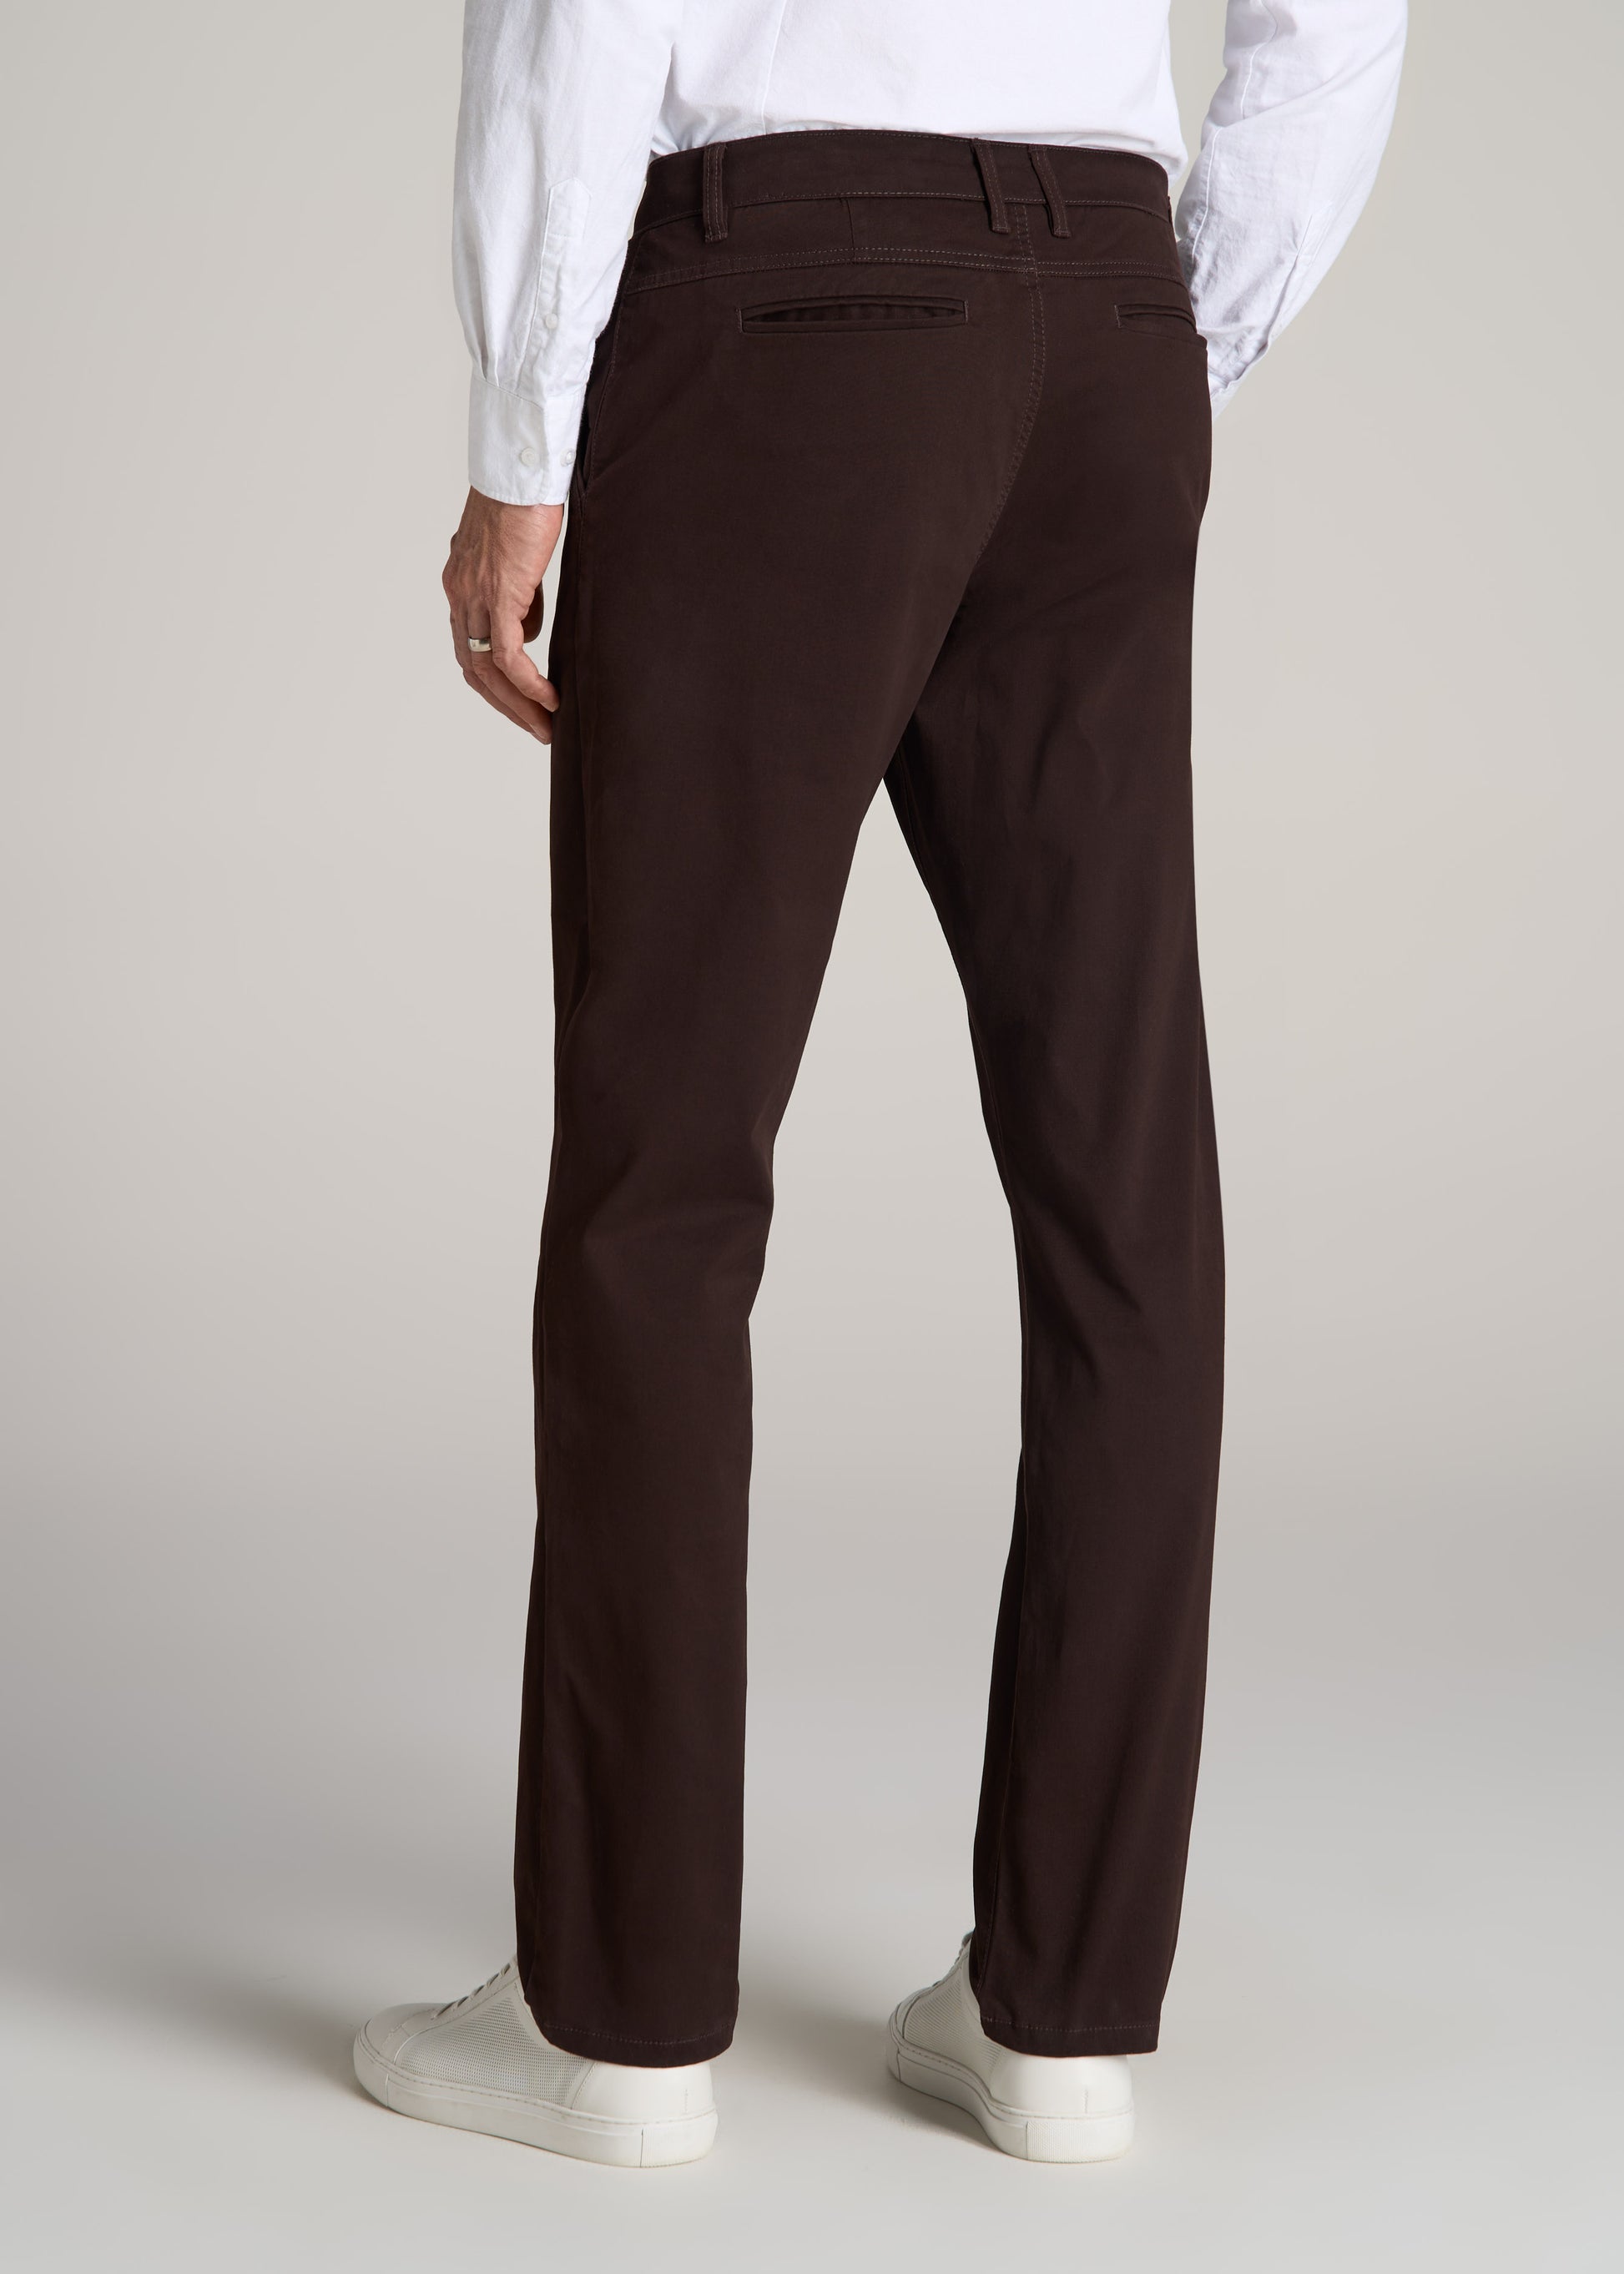 American-Tall-Men-J1-Straight-Fit-Chino-Pant-Chocolate-back